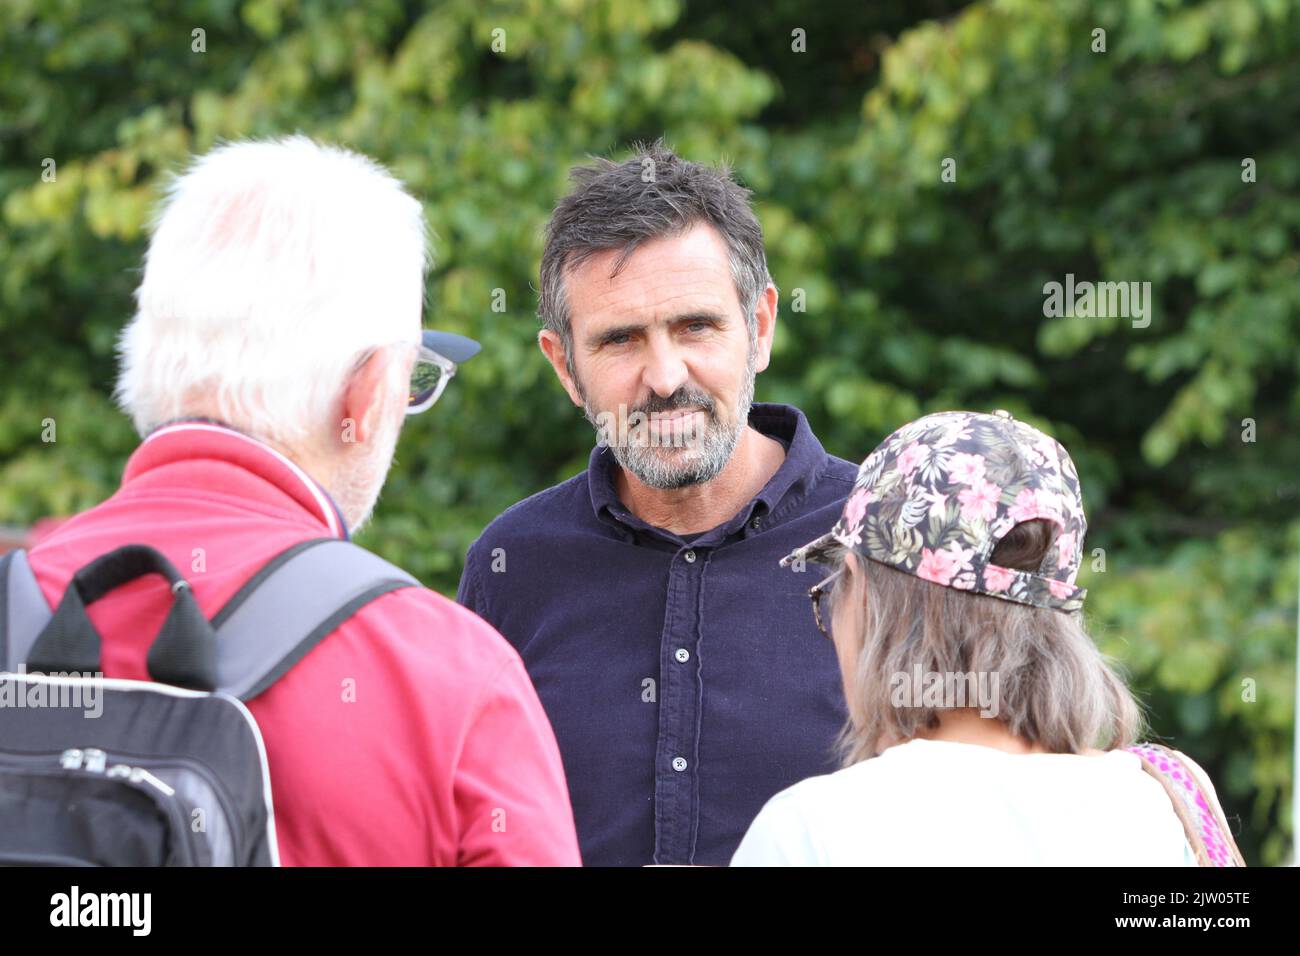 The first ever BBC Gardeners' World Autumn Fair is taking place at Audley End House in Essex. Adam Frost, one of the presenters of the BBC Gardeners' World programme, chatting with people. Stock Photo